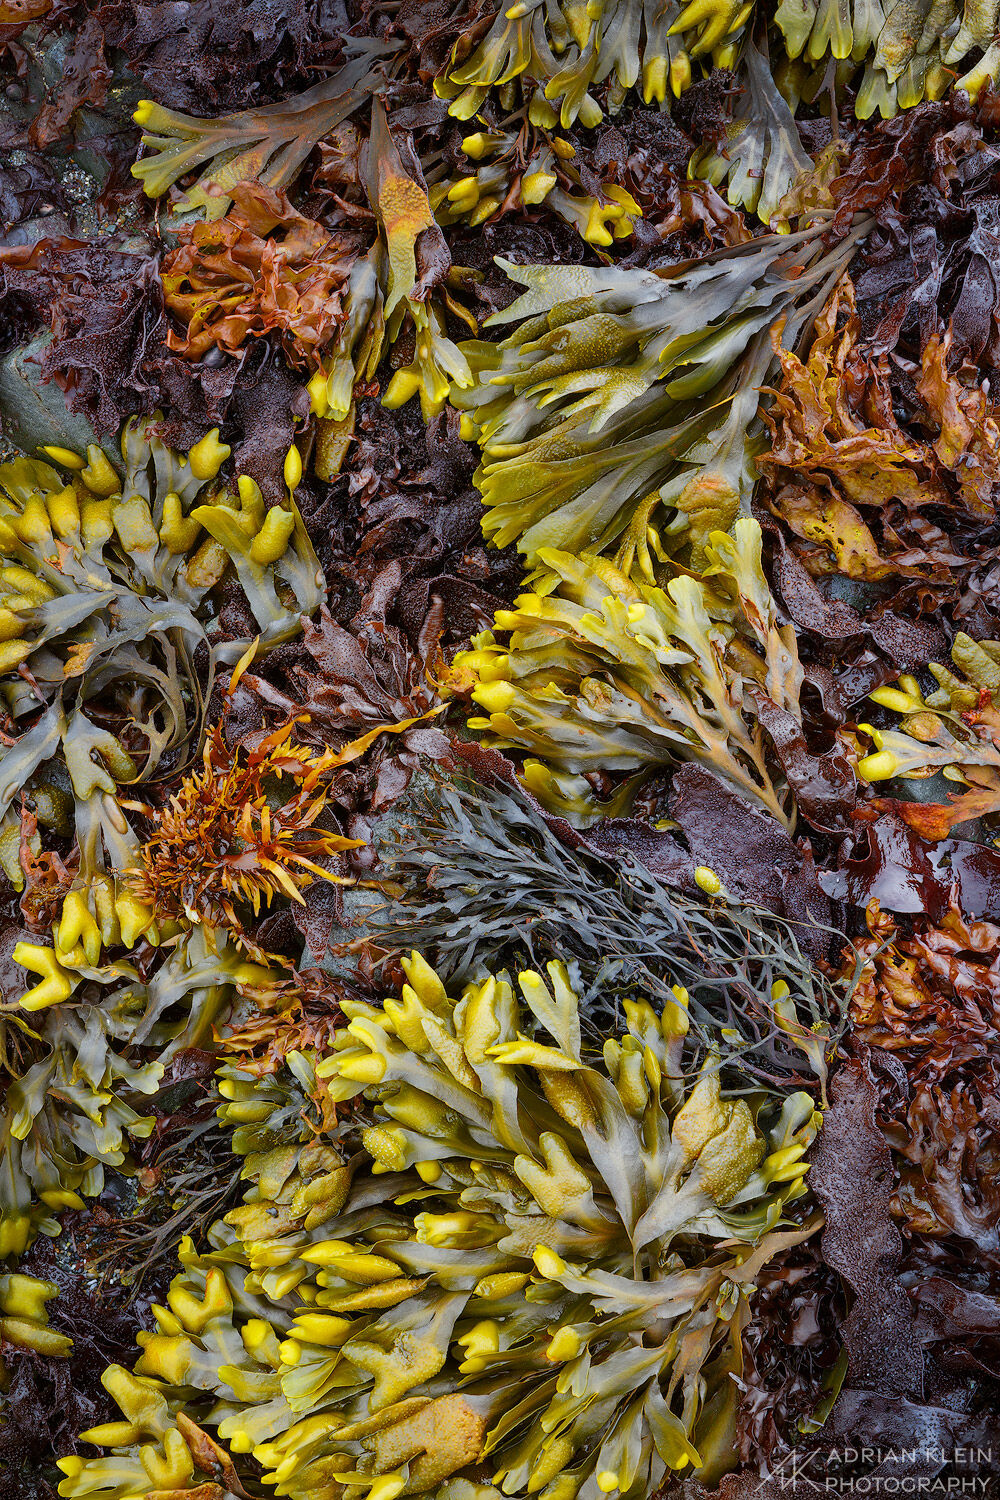 A beautiful mix of kelp and seaweed in nature color tones seen at low tide. North California Coast. Limited Edition of 50.